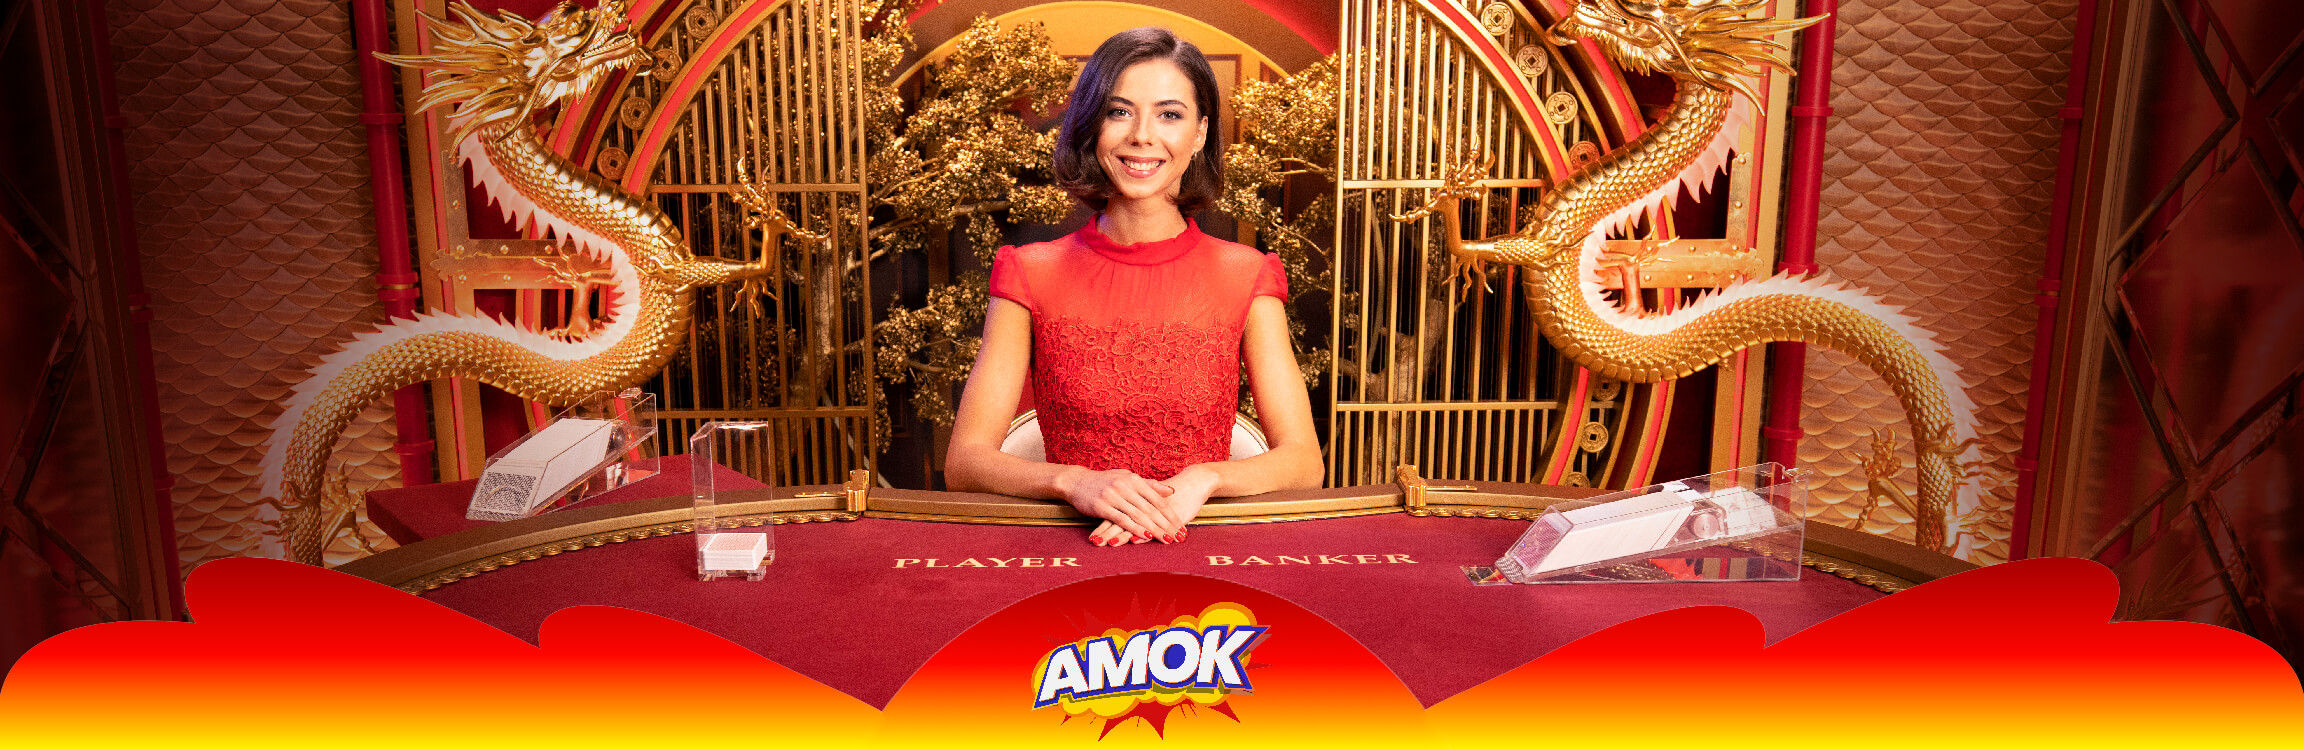 Online baccarat with live dealer at amok casino